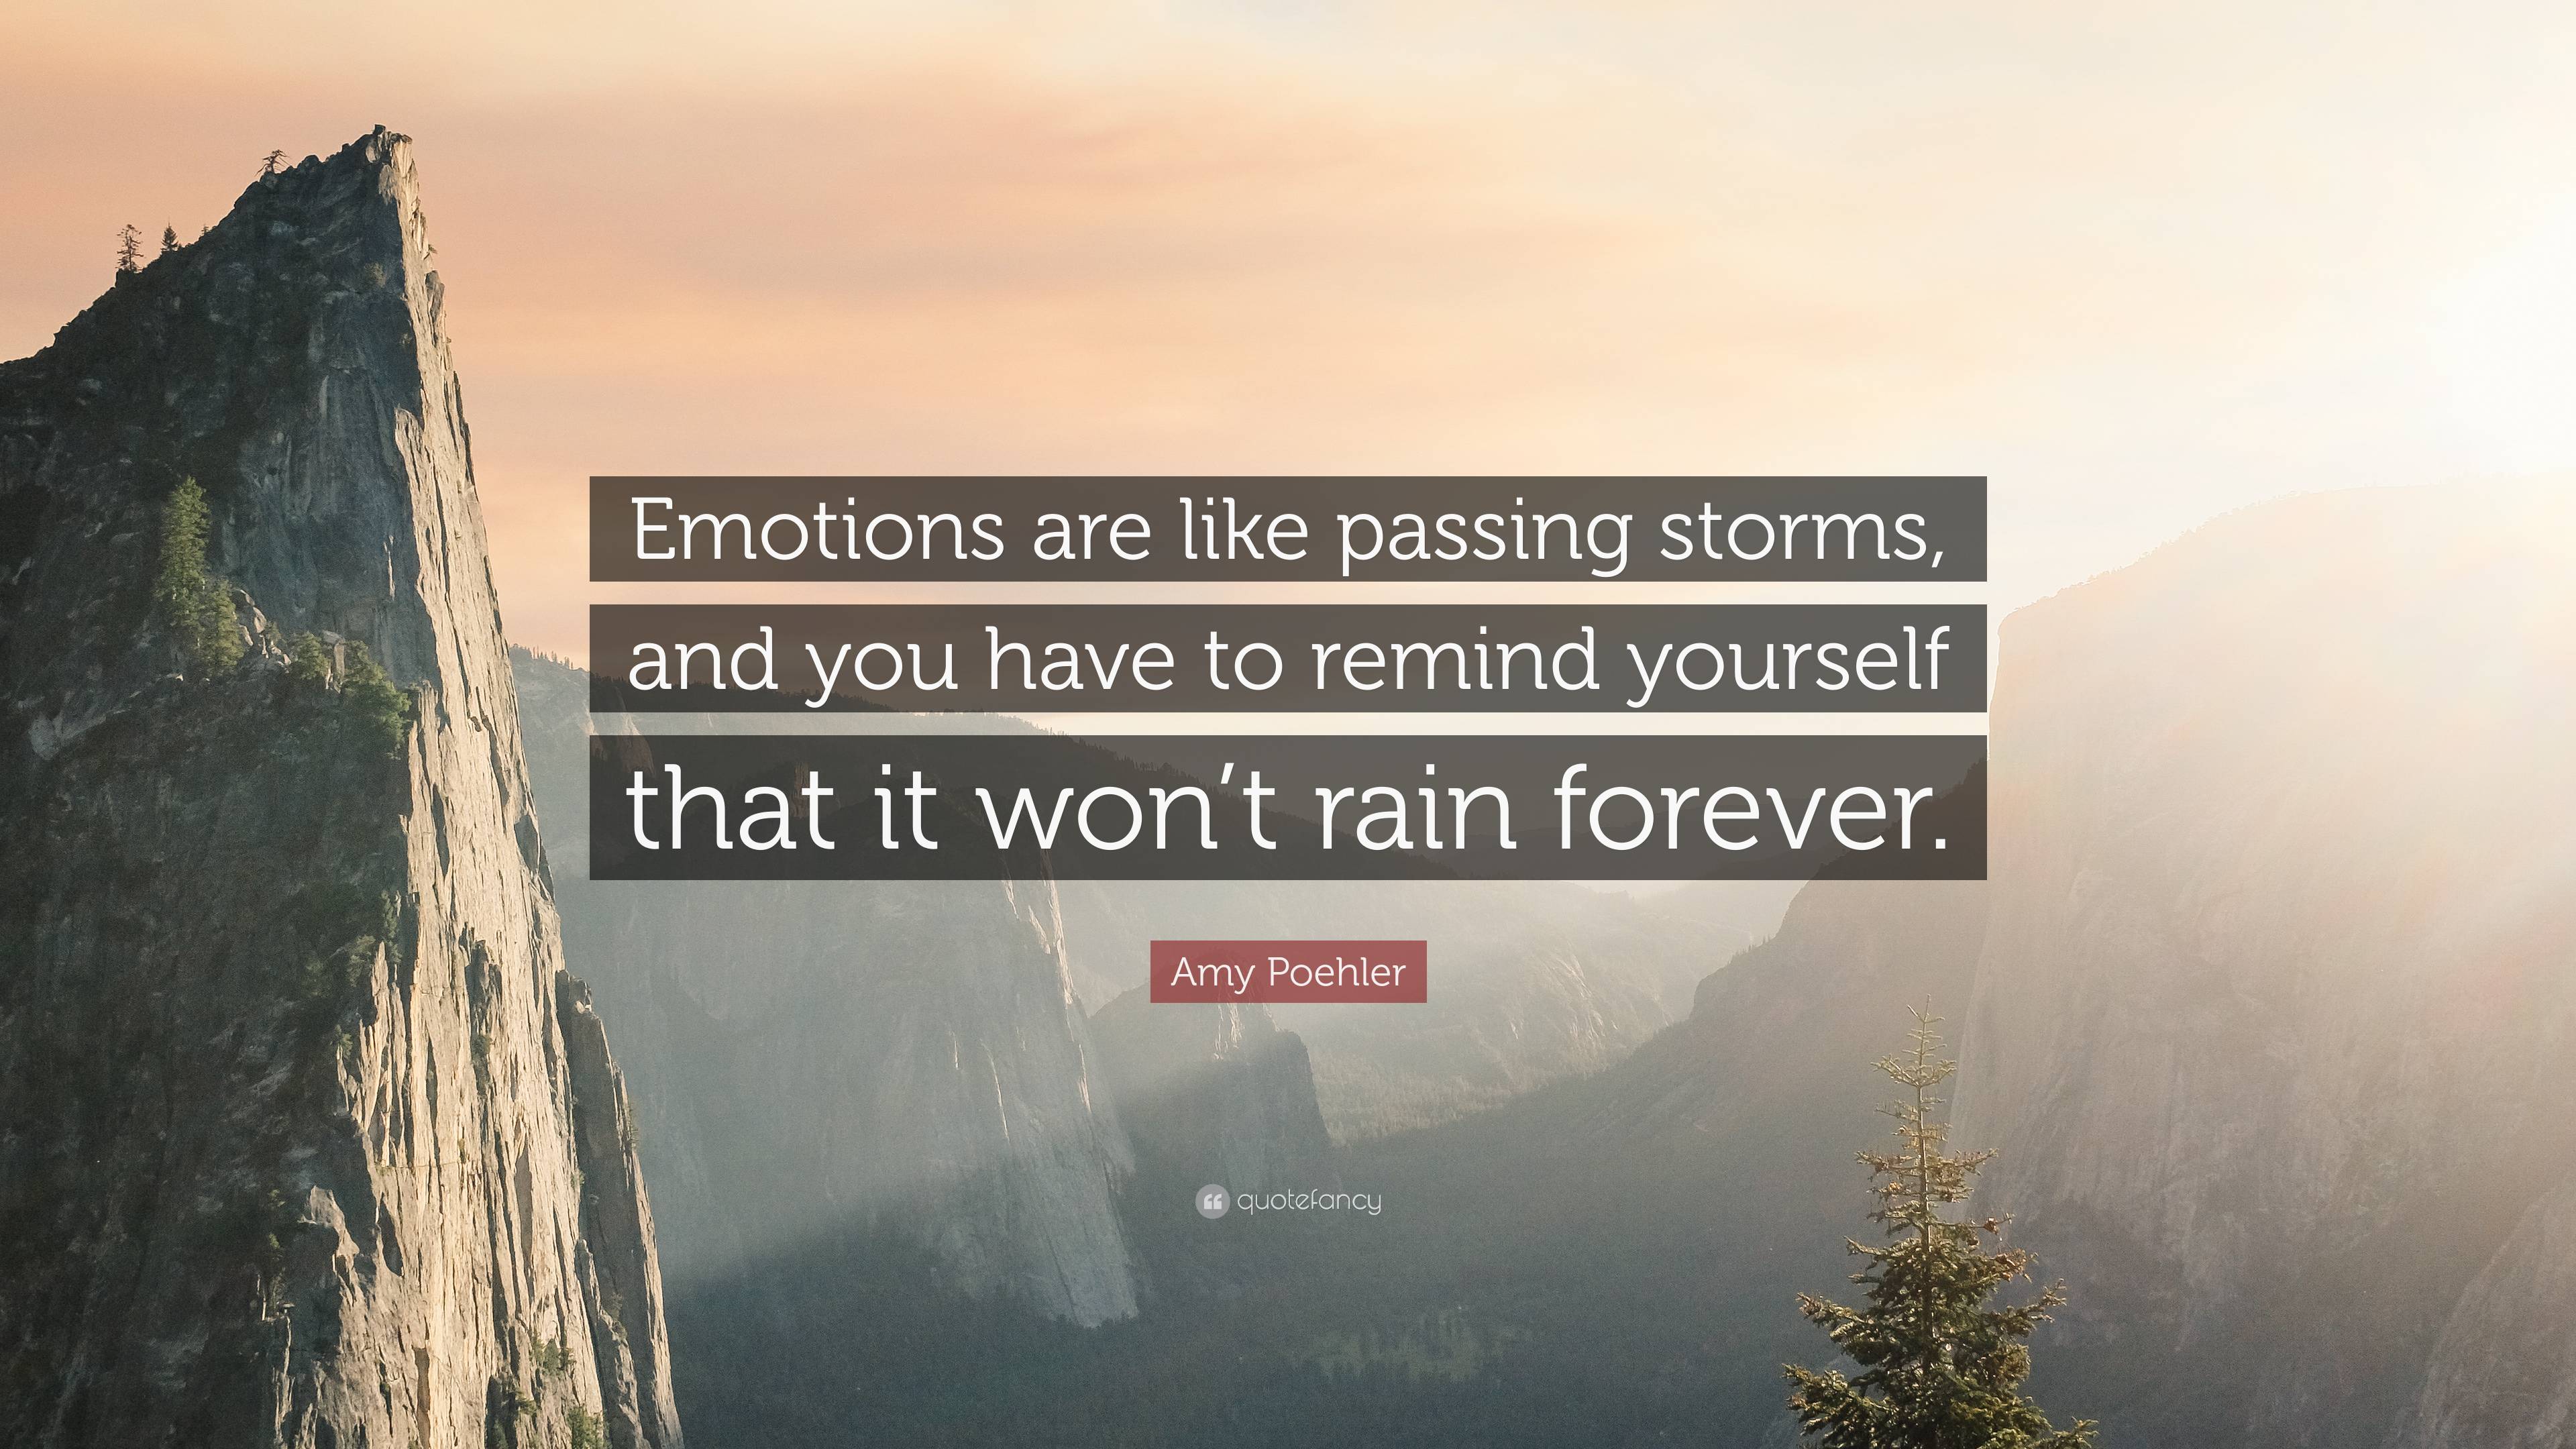 Amy Poehler Quote: “Emotions are like passing storms, and you have to ...